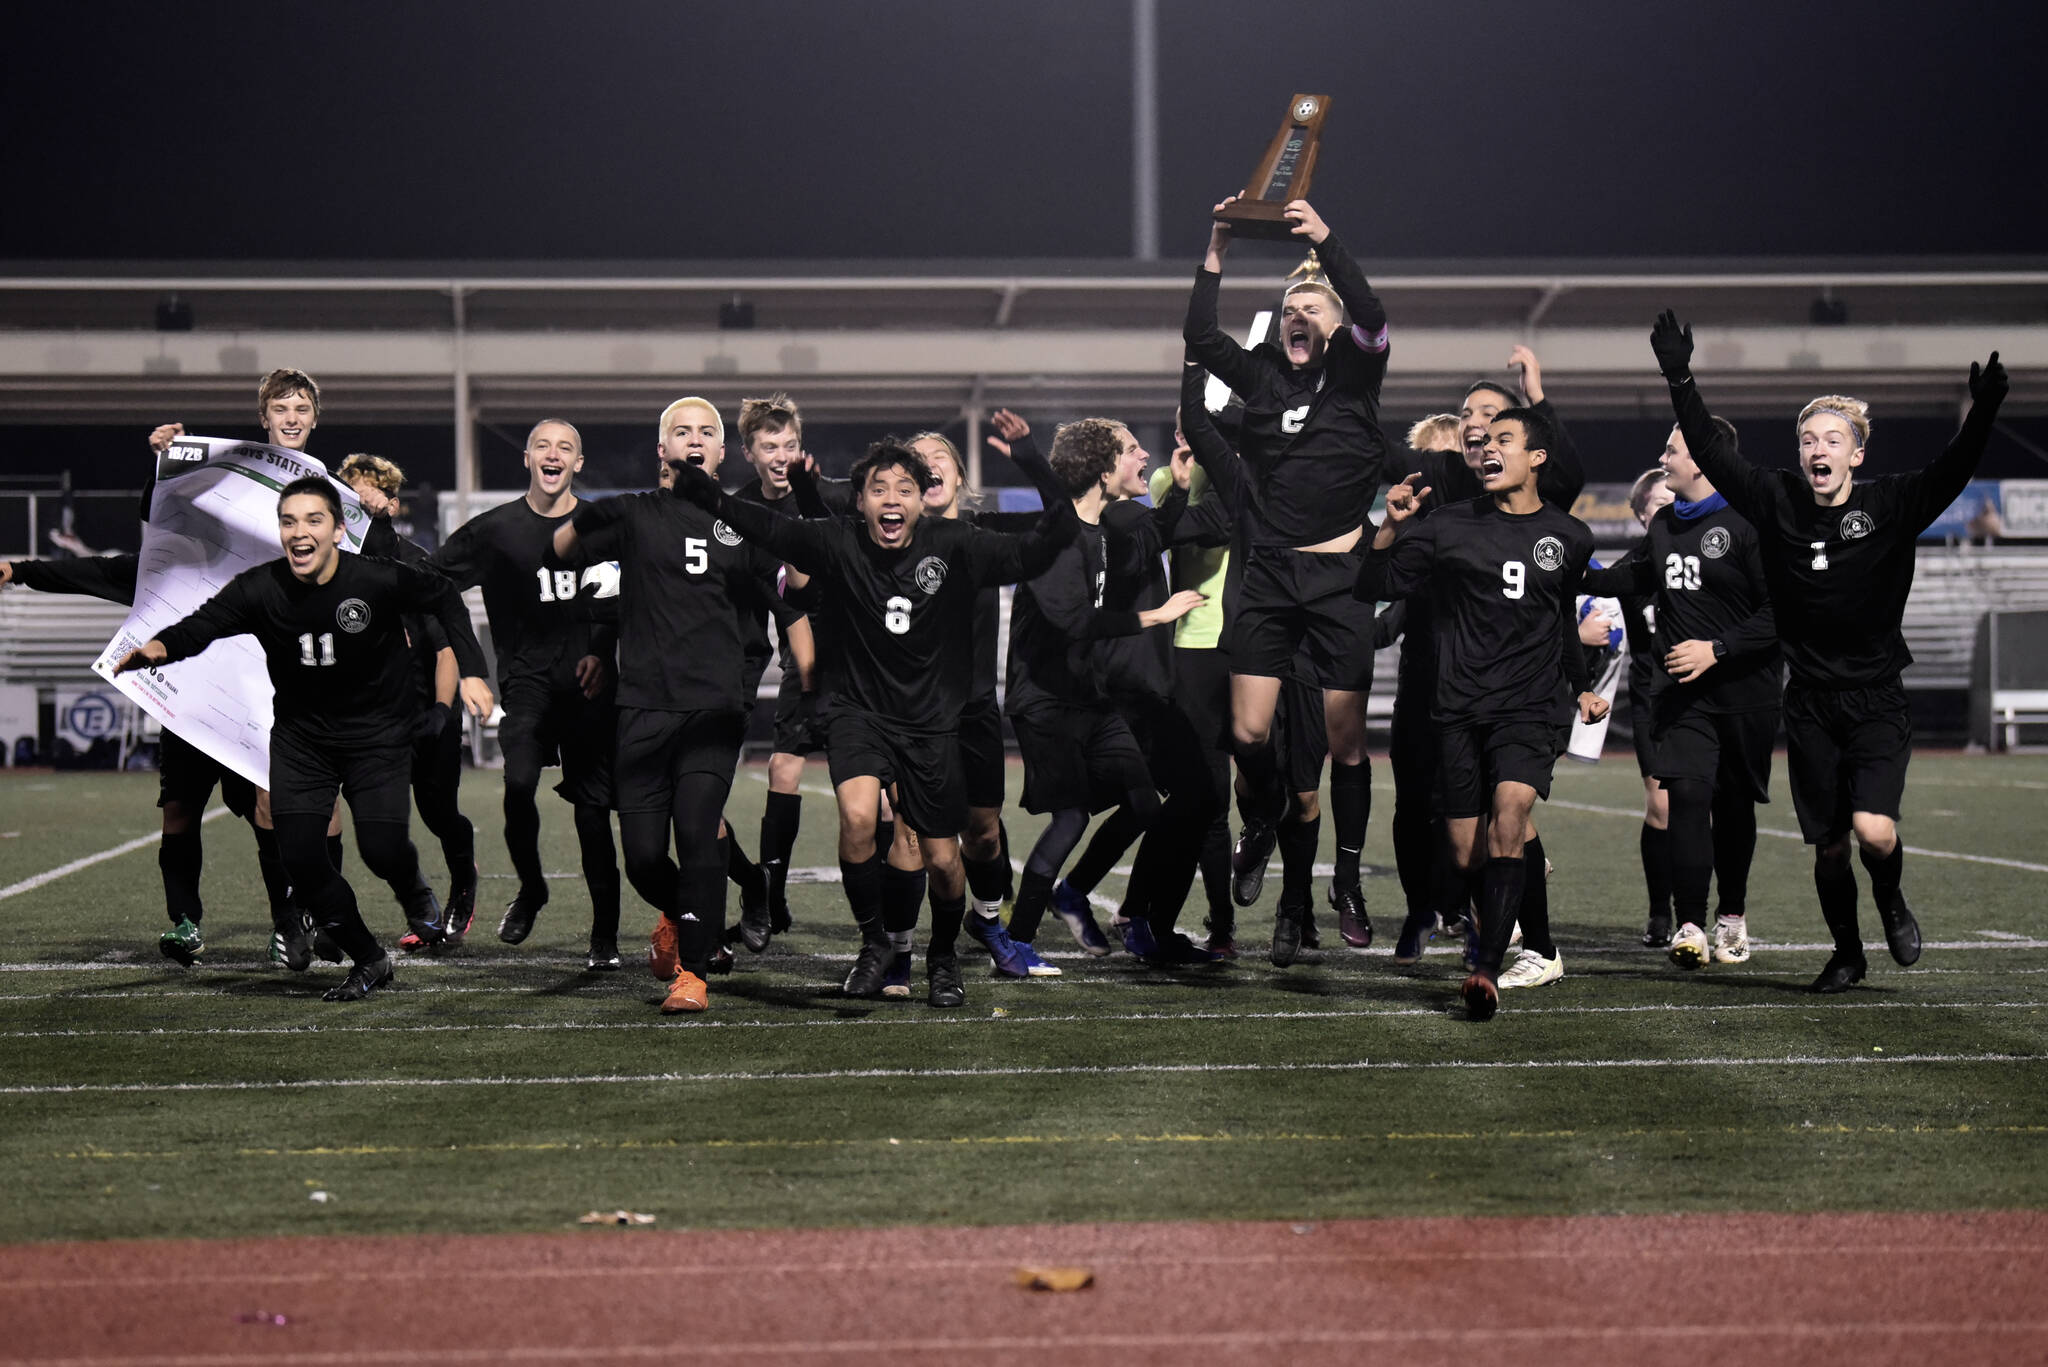 Chris Sutton photo
The Orcas Vikings soccer team with the state championship trophy on Saturday, Nov. 20. It was a tense final game against Providence that went into overtime.